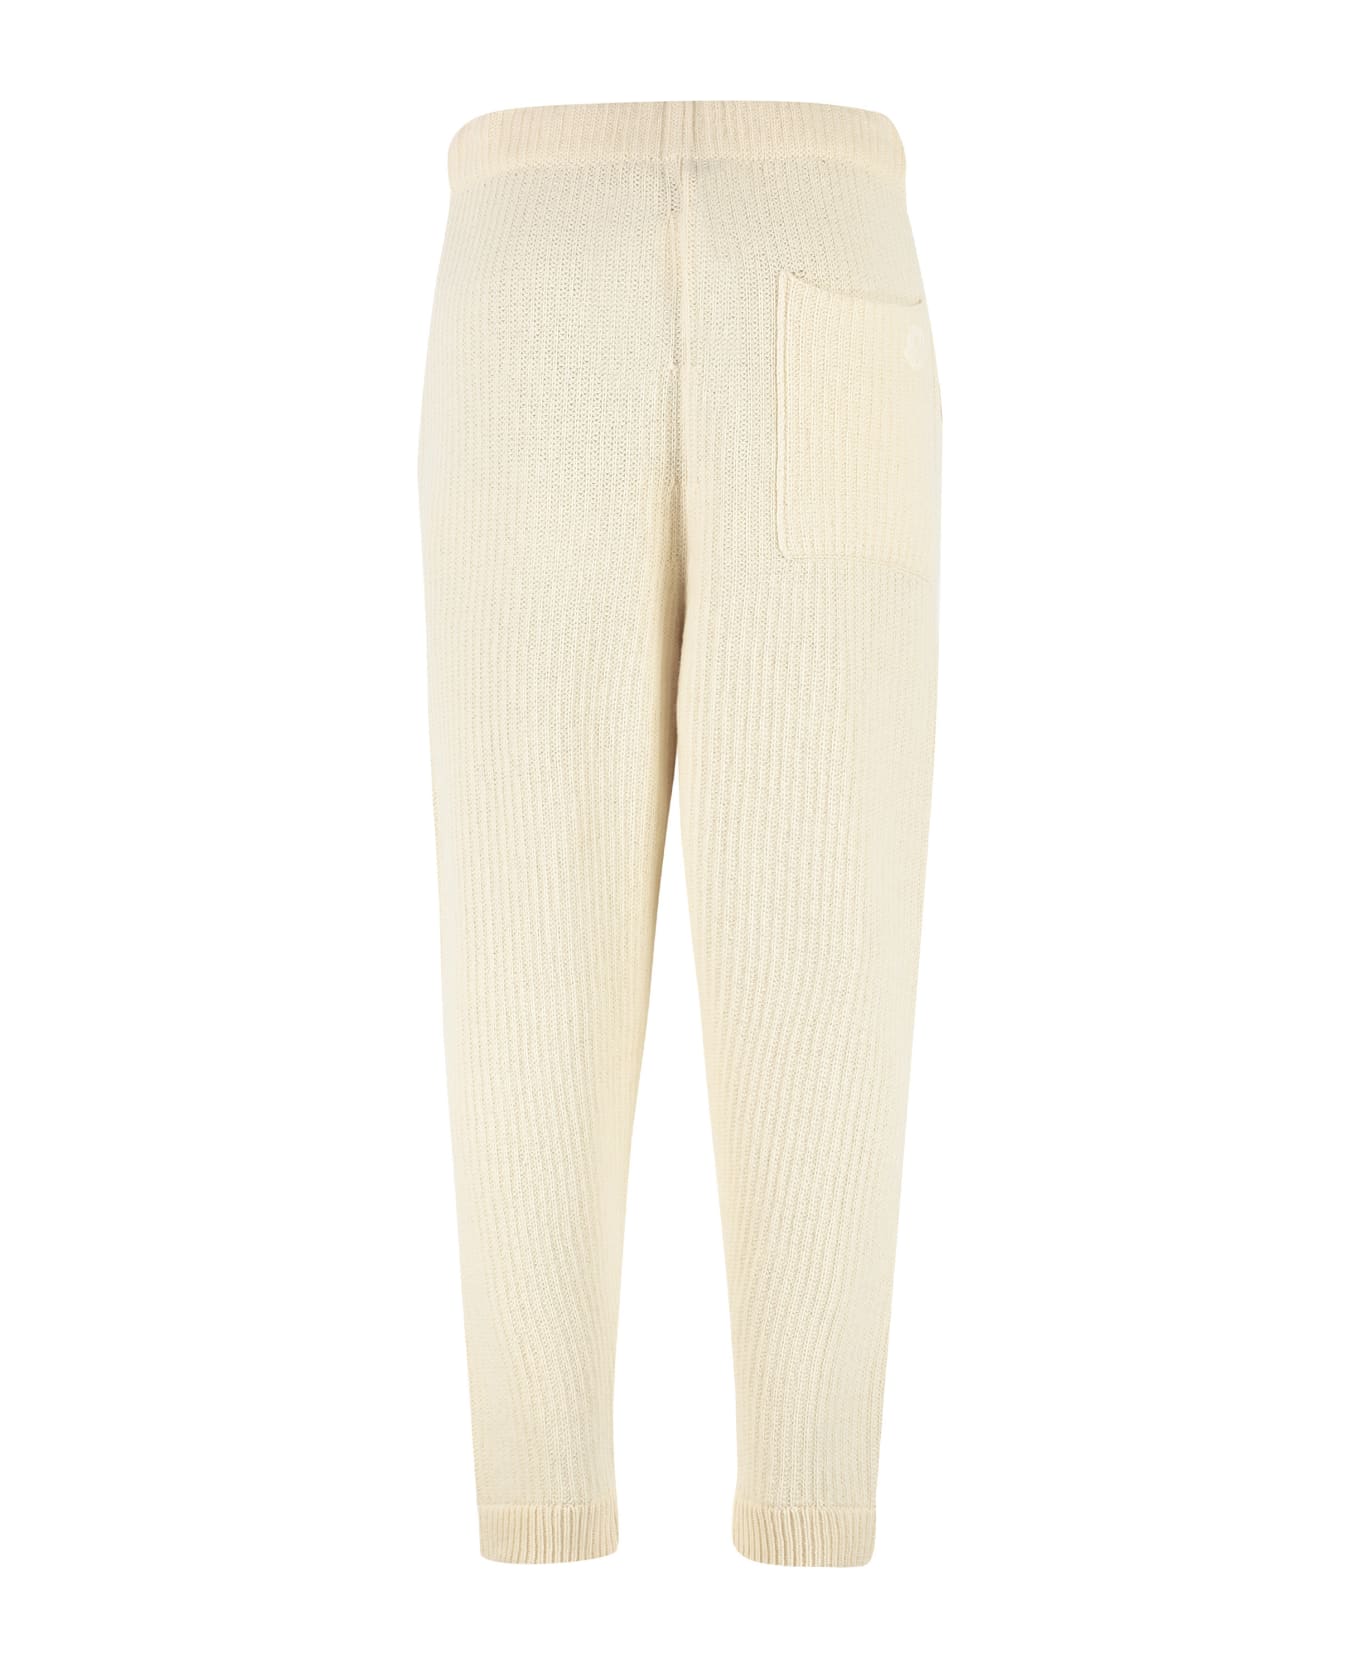 Moncler 2 Moncler 1952 - Rib Knitted Trousers - Ivory スウェットパンツ